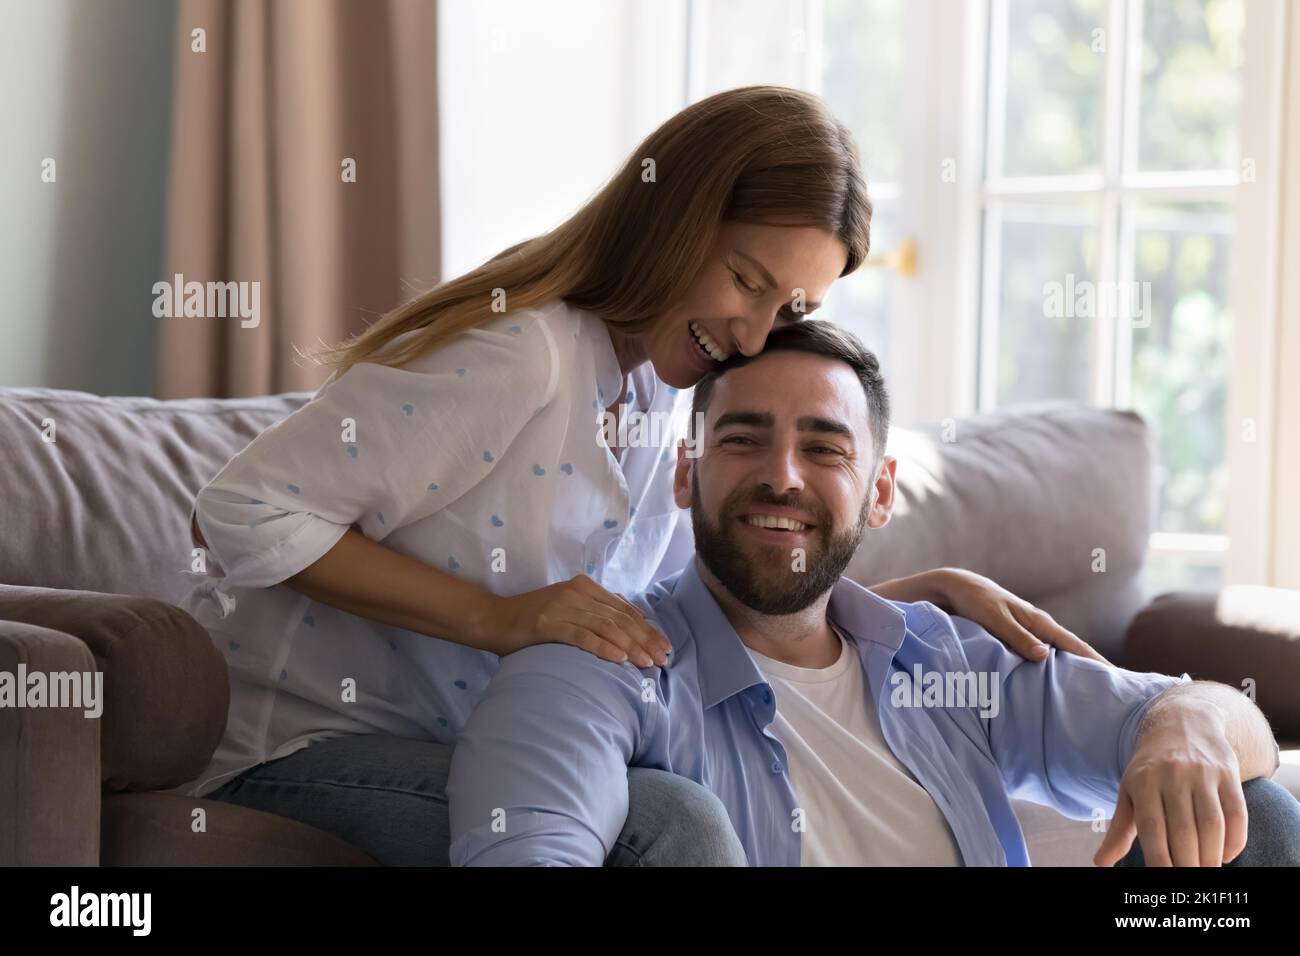 Happy young beautiful woman and handsome man relaxing at home Stock Photo